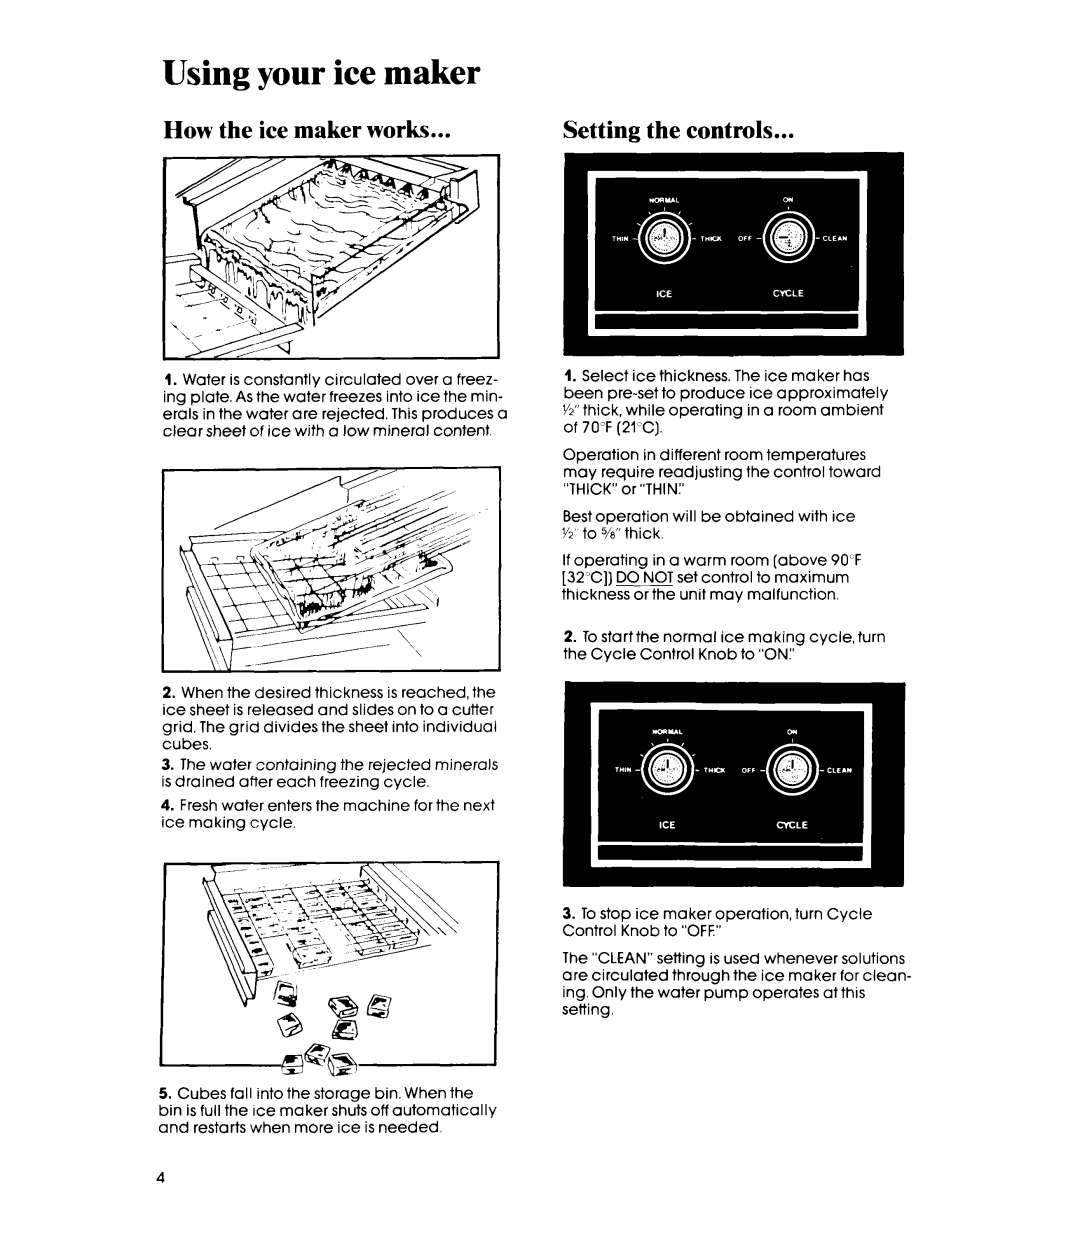 Whirlpool EC5100 manual Using your ice maker, How the ice maker works, Setting the controls 